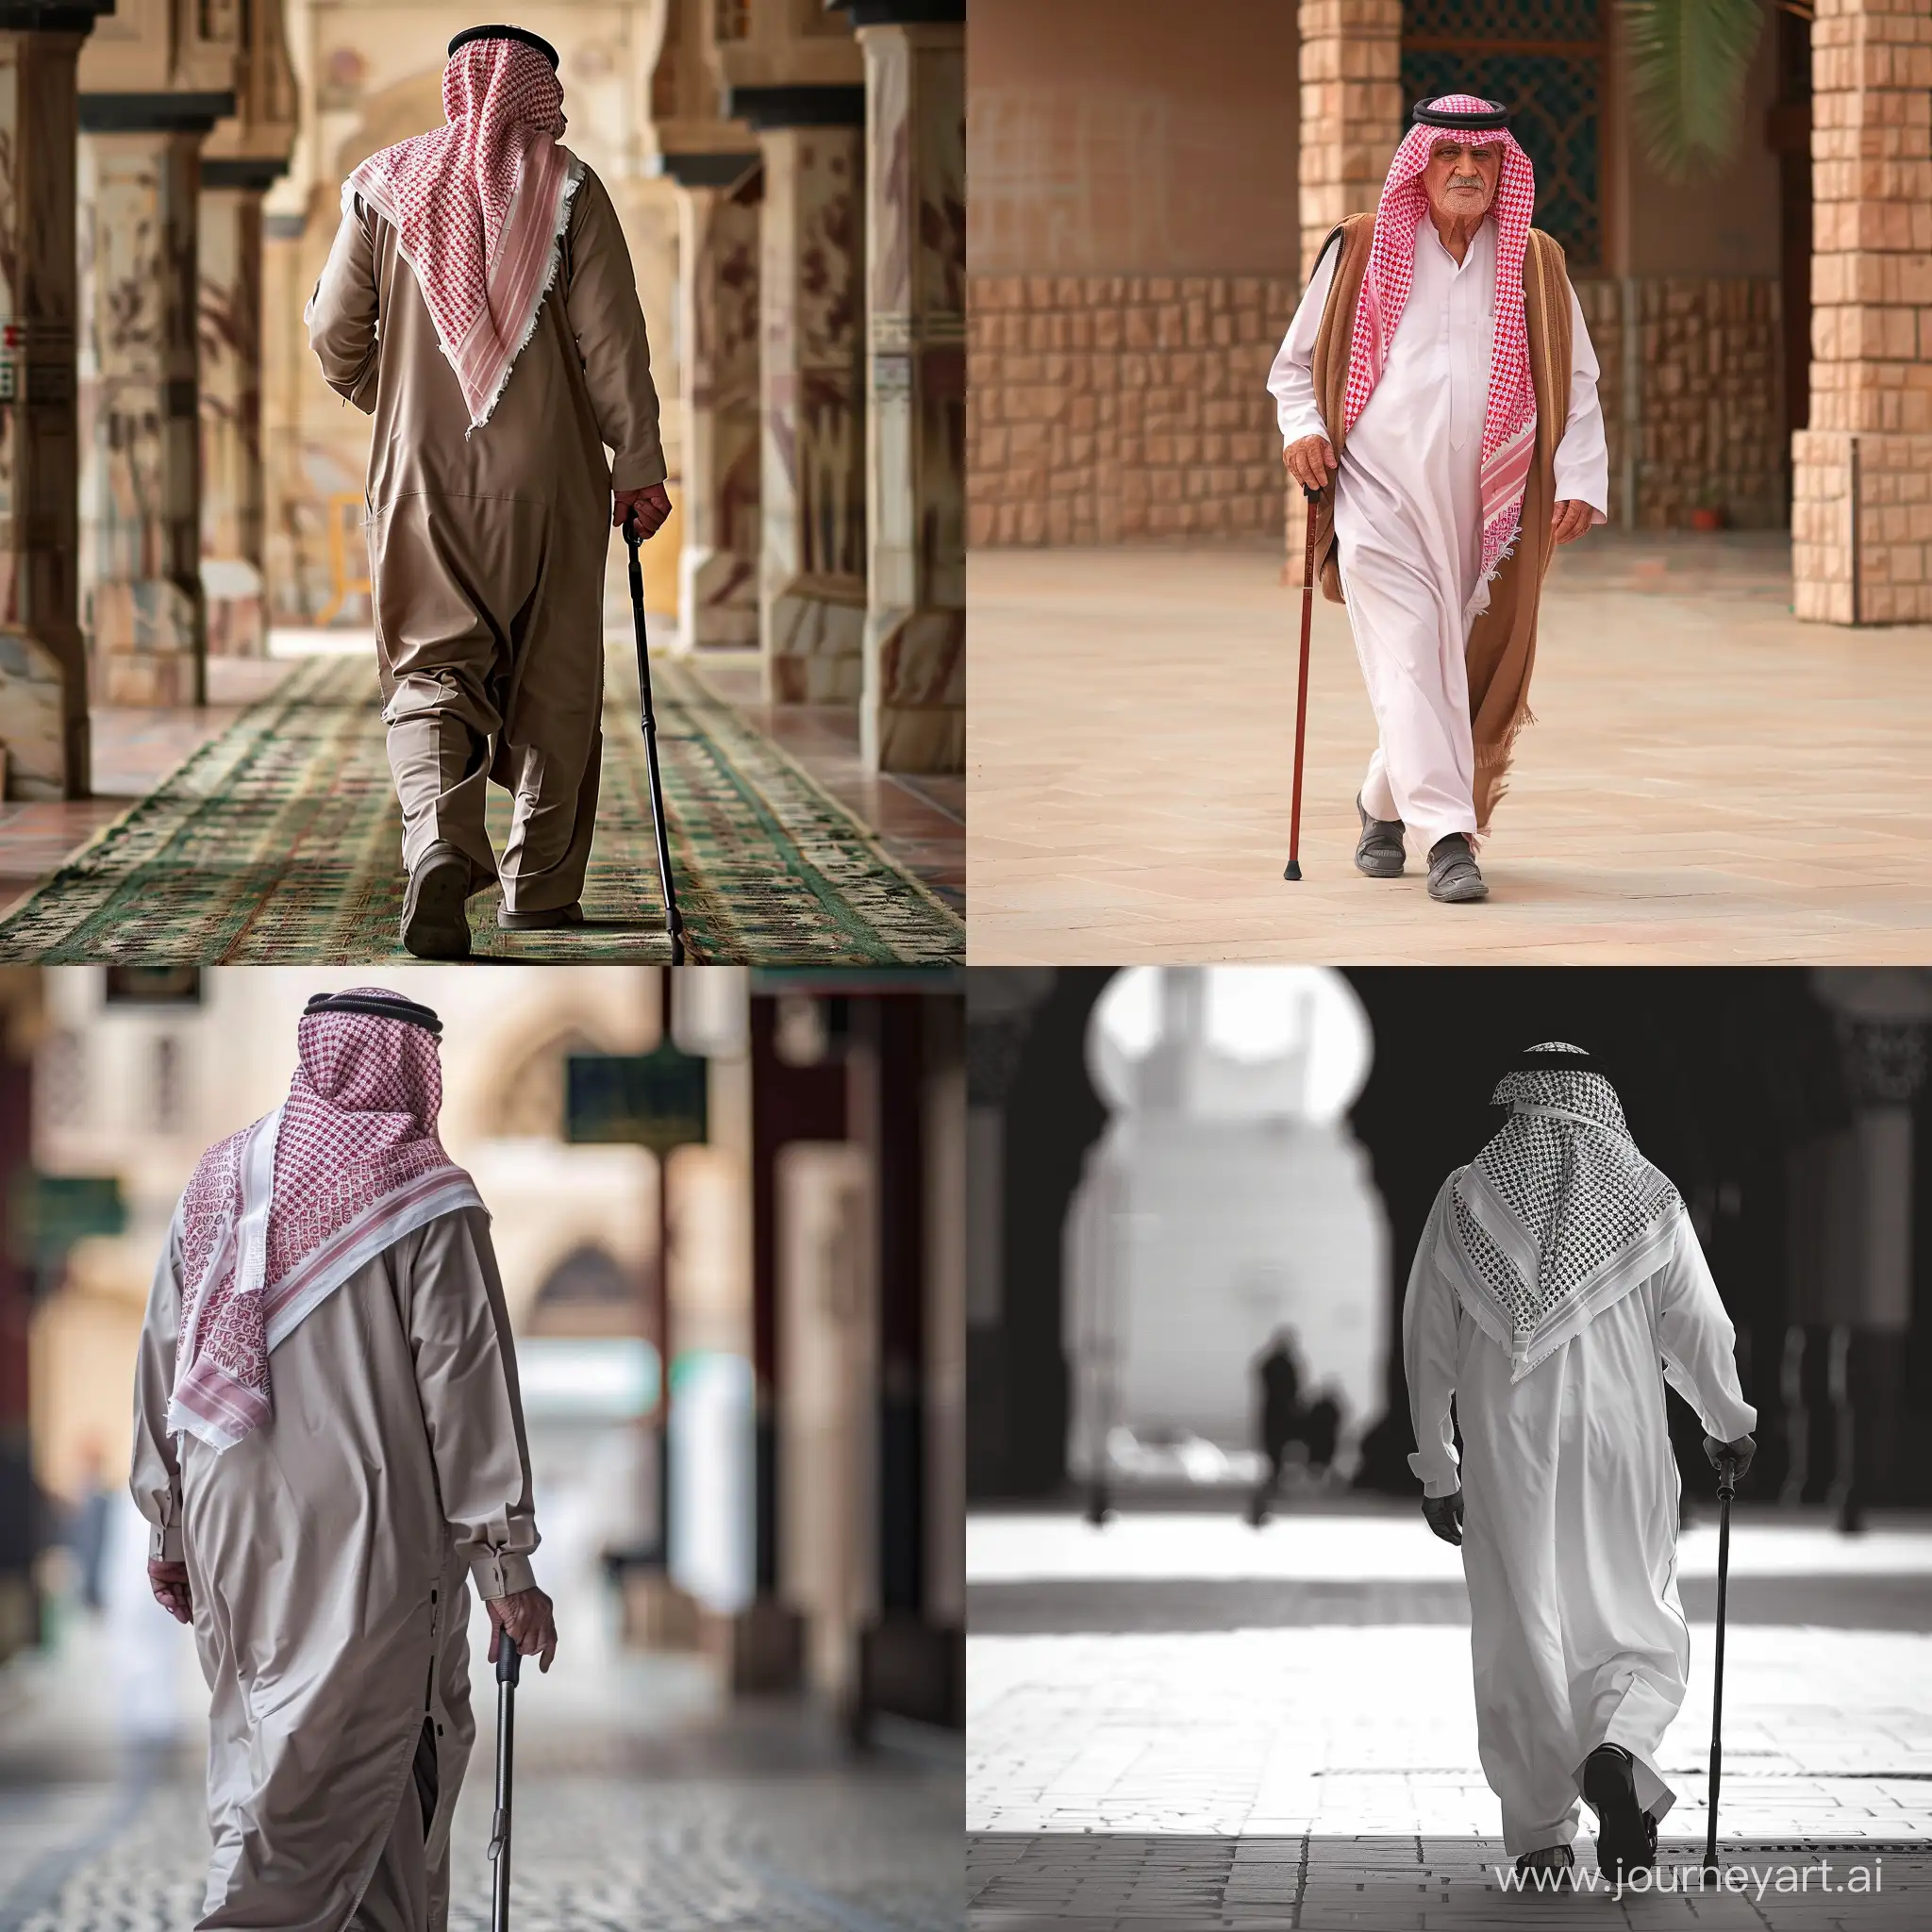 Elderly-Saudi-Man-with-Cane-Heading-to-Mosque